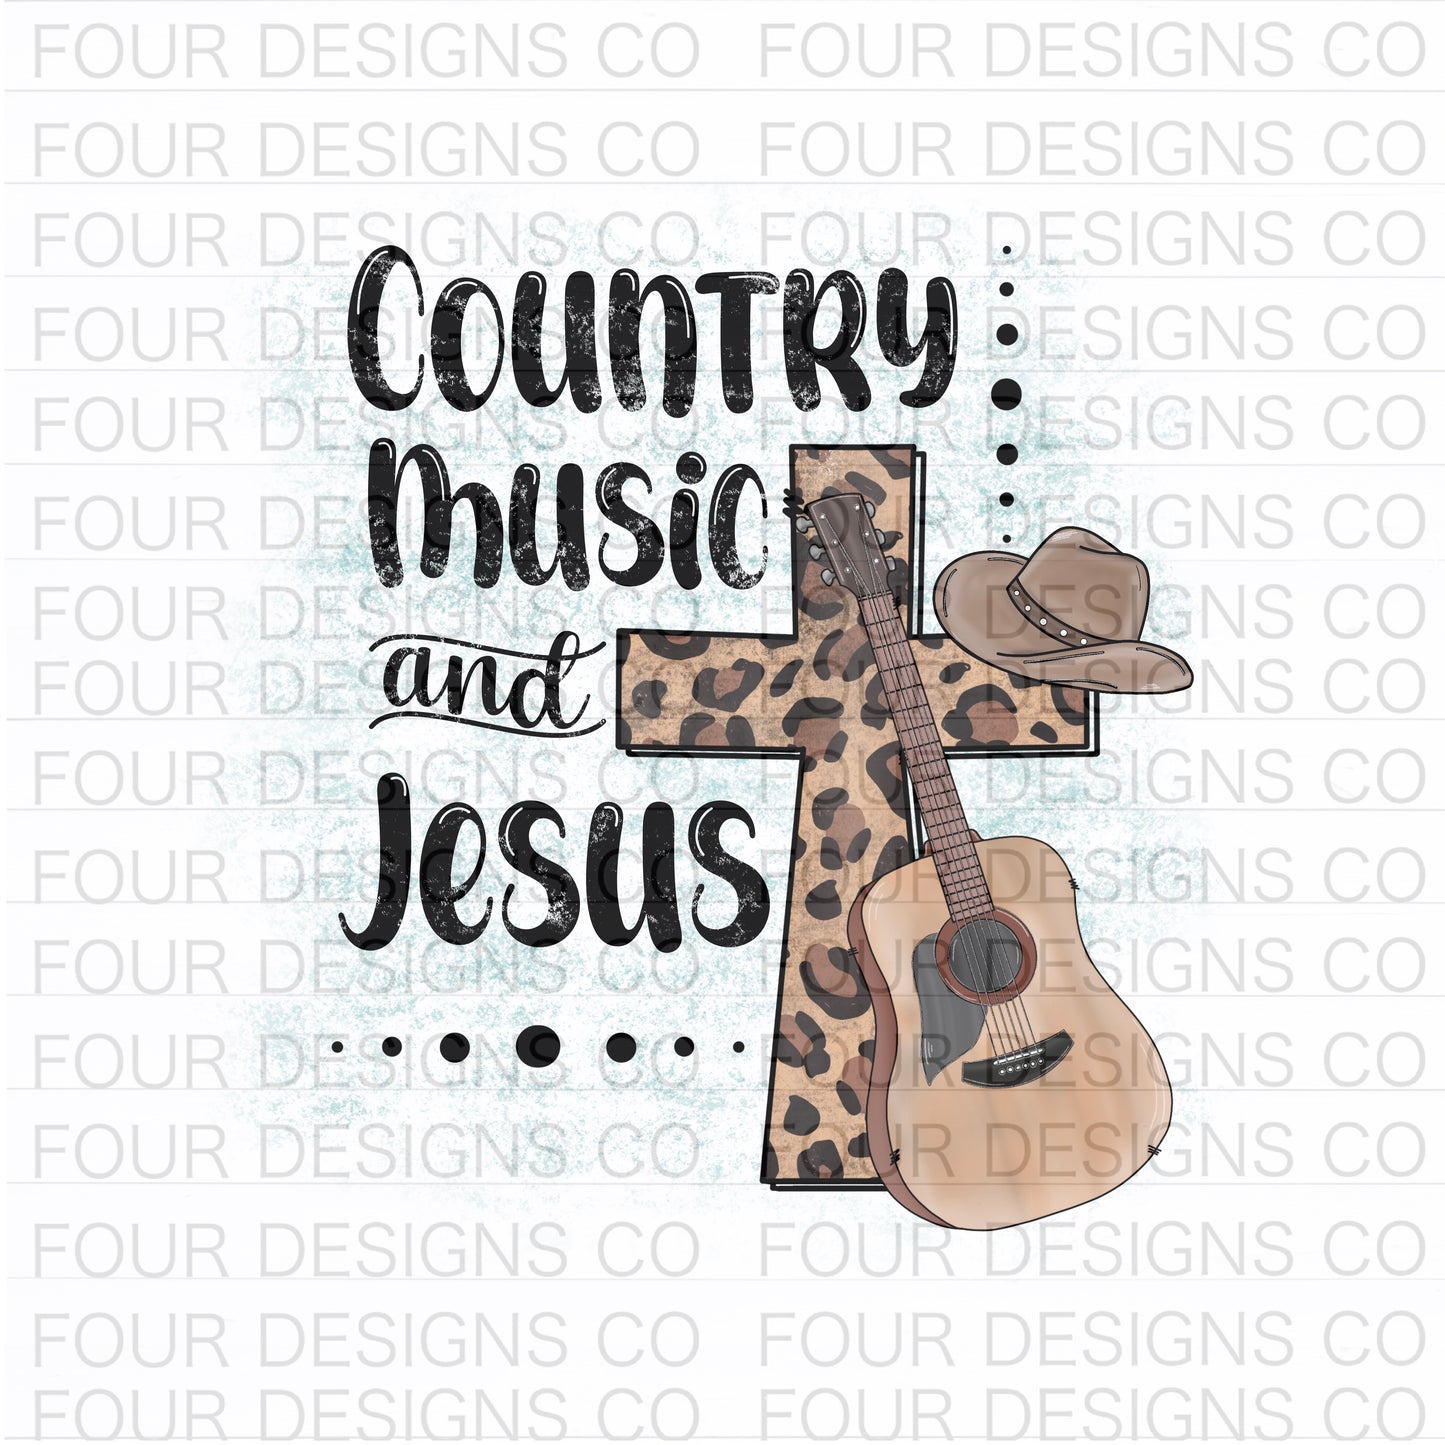 Country music and Jesus